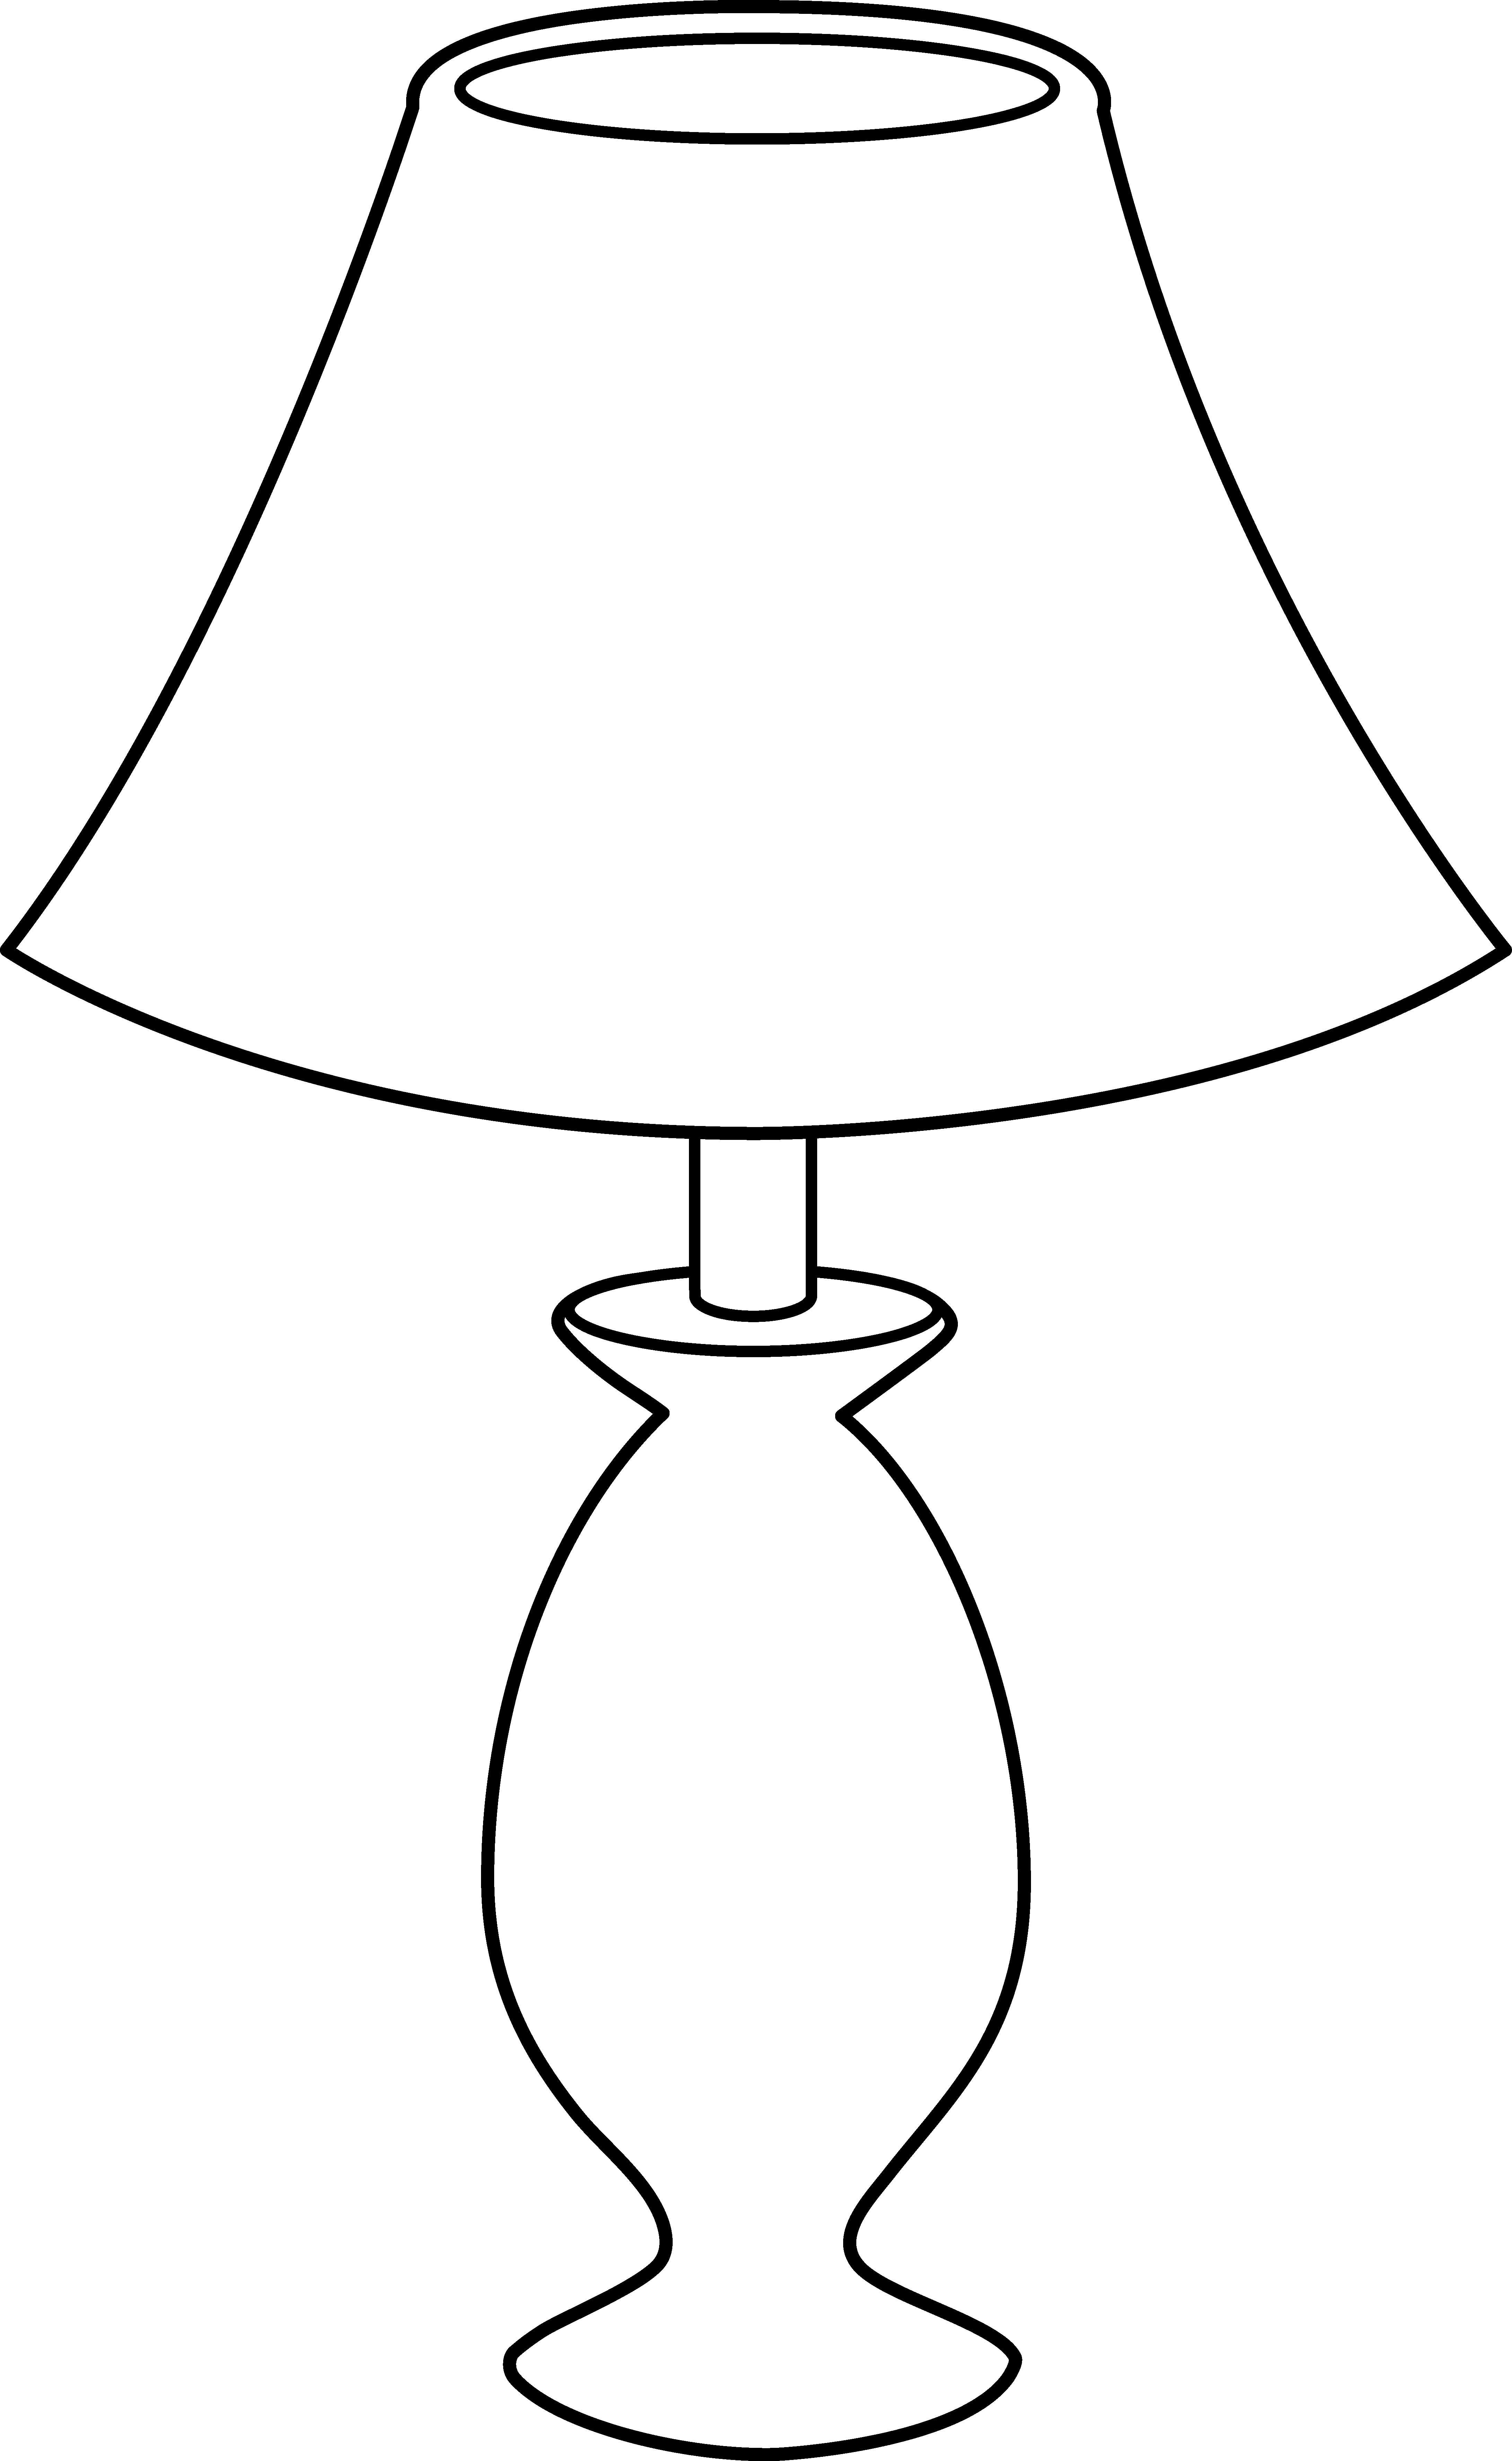 Free Lamp Outline, Download Free Lamp Outline png images, Free ClipArts